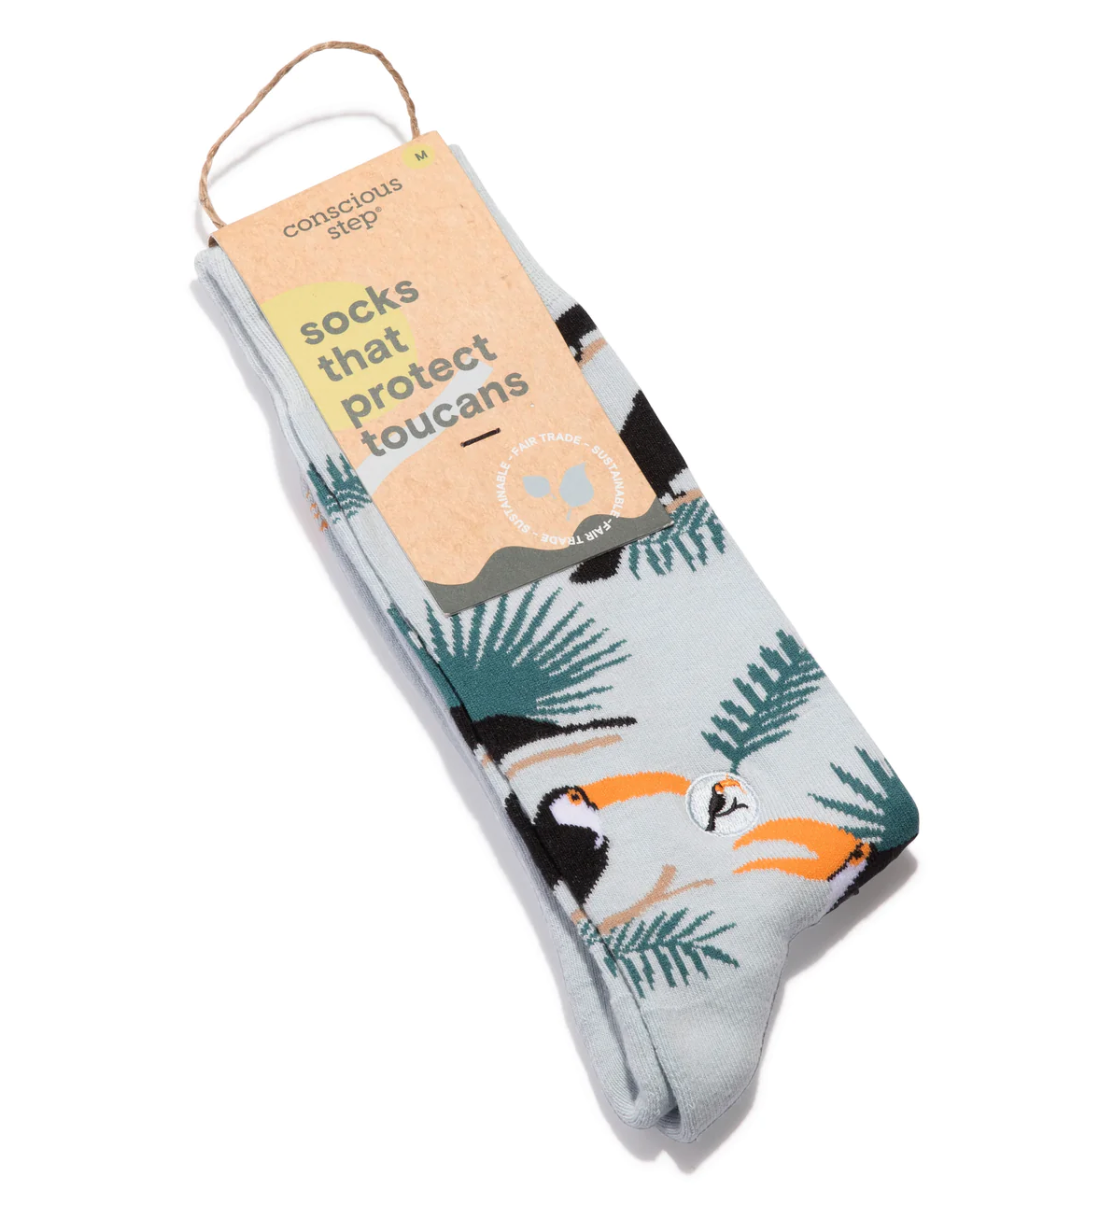 Socks That Protect Toucans